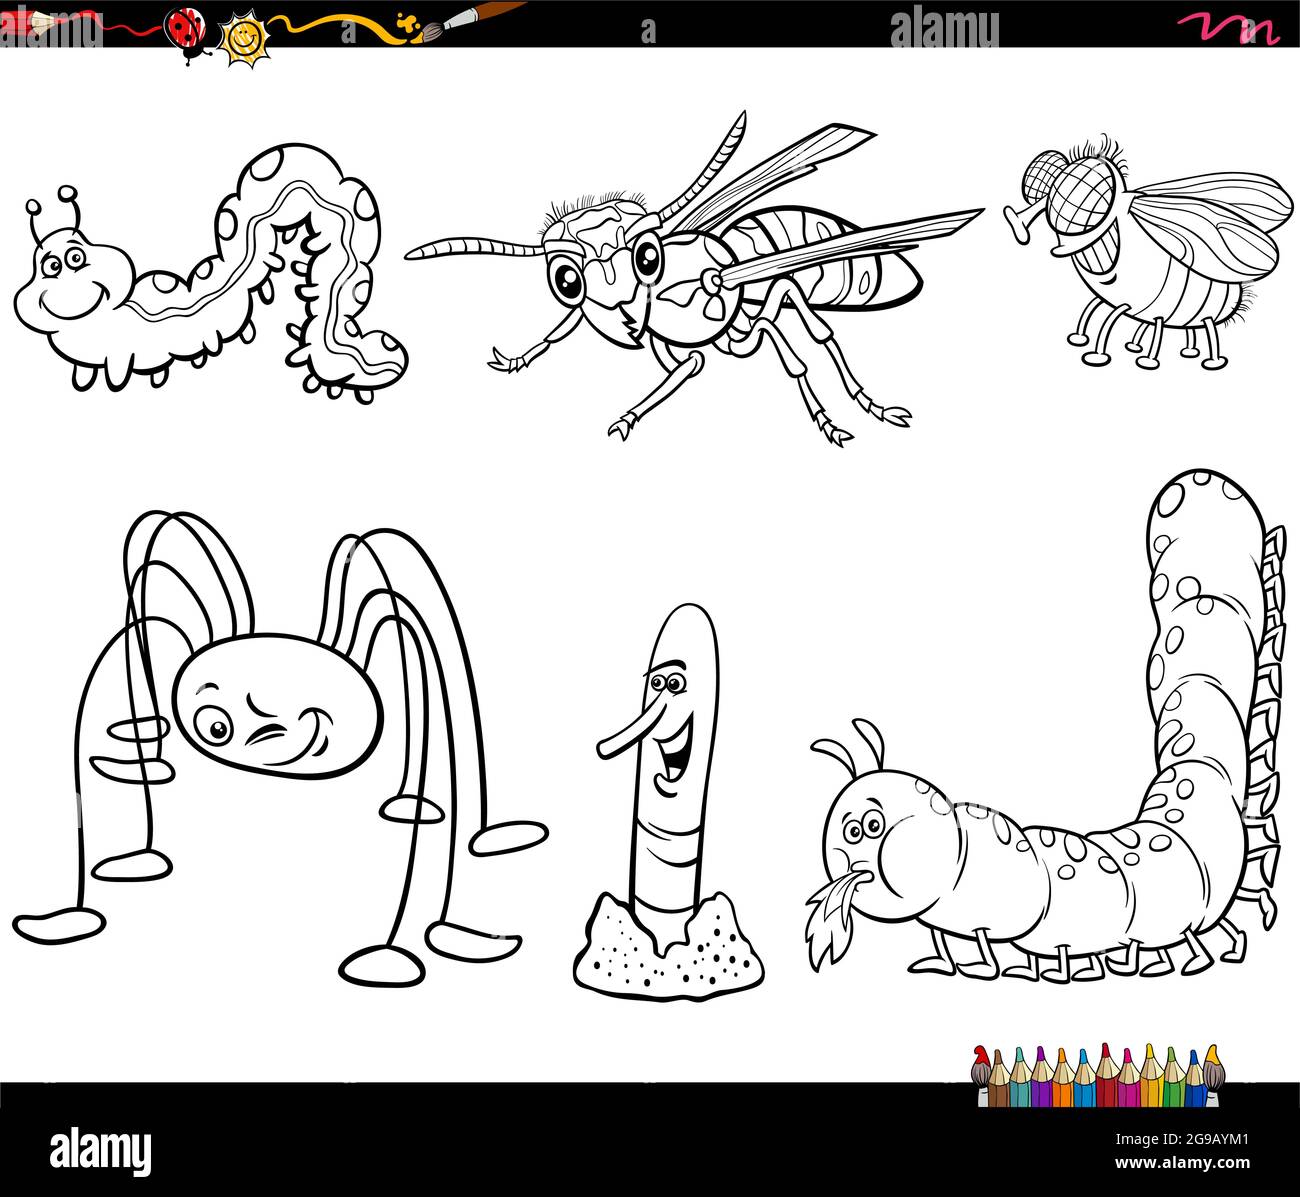 Black and white cartoon illustration of insects animals comic characters set coloring book page Stock Vector